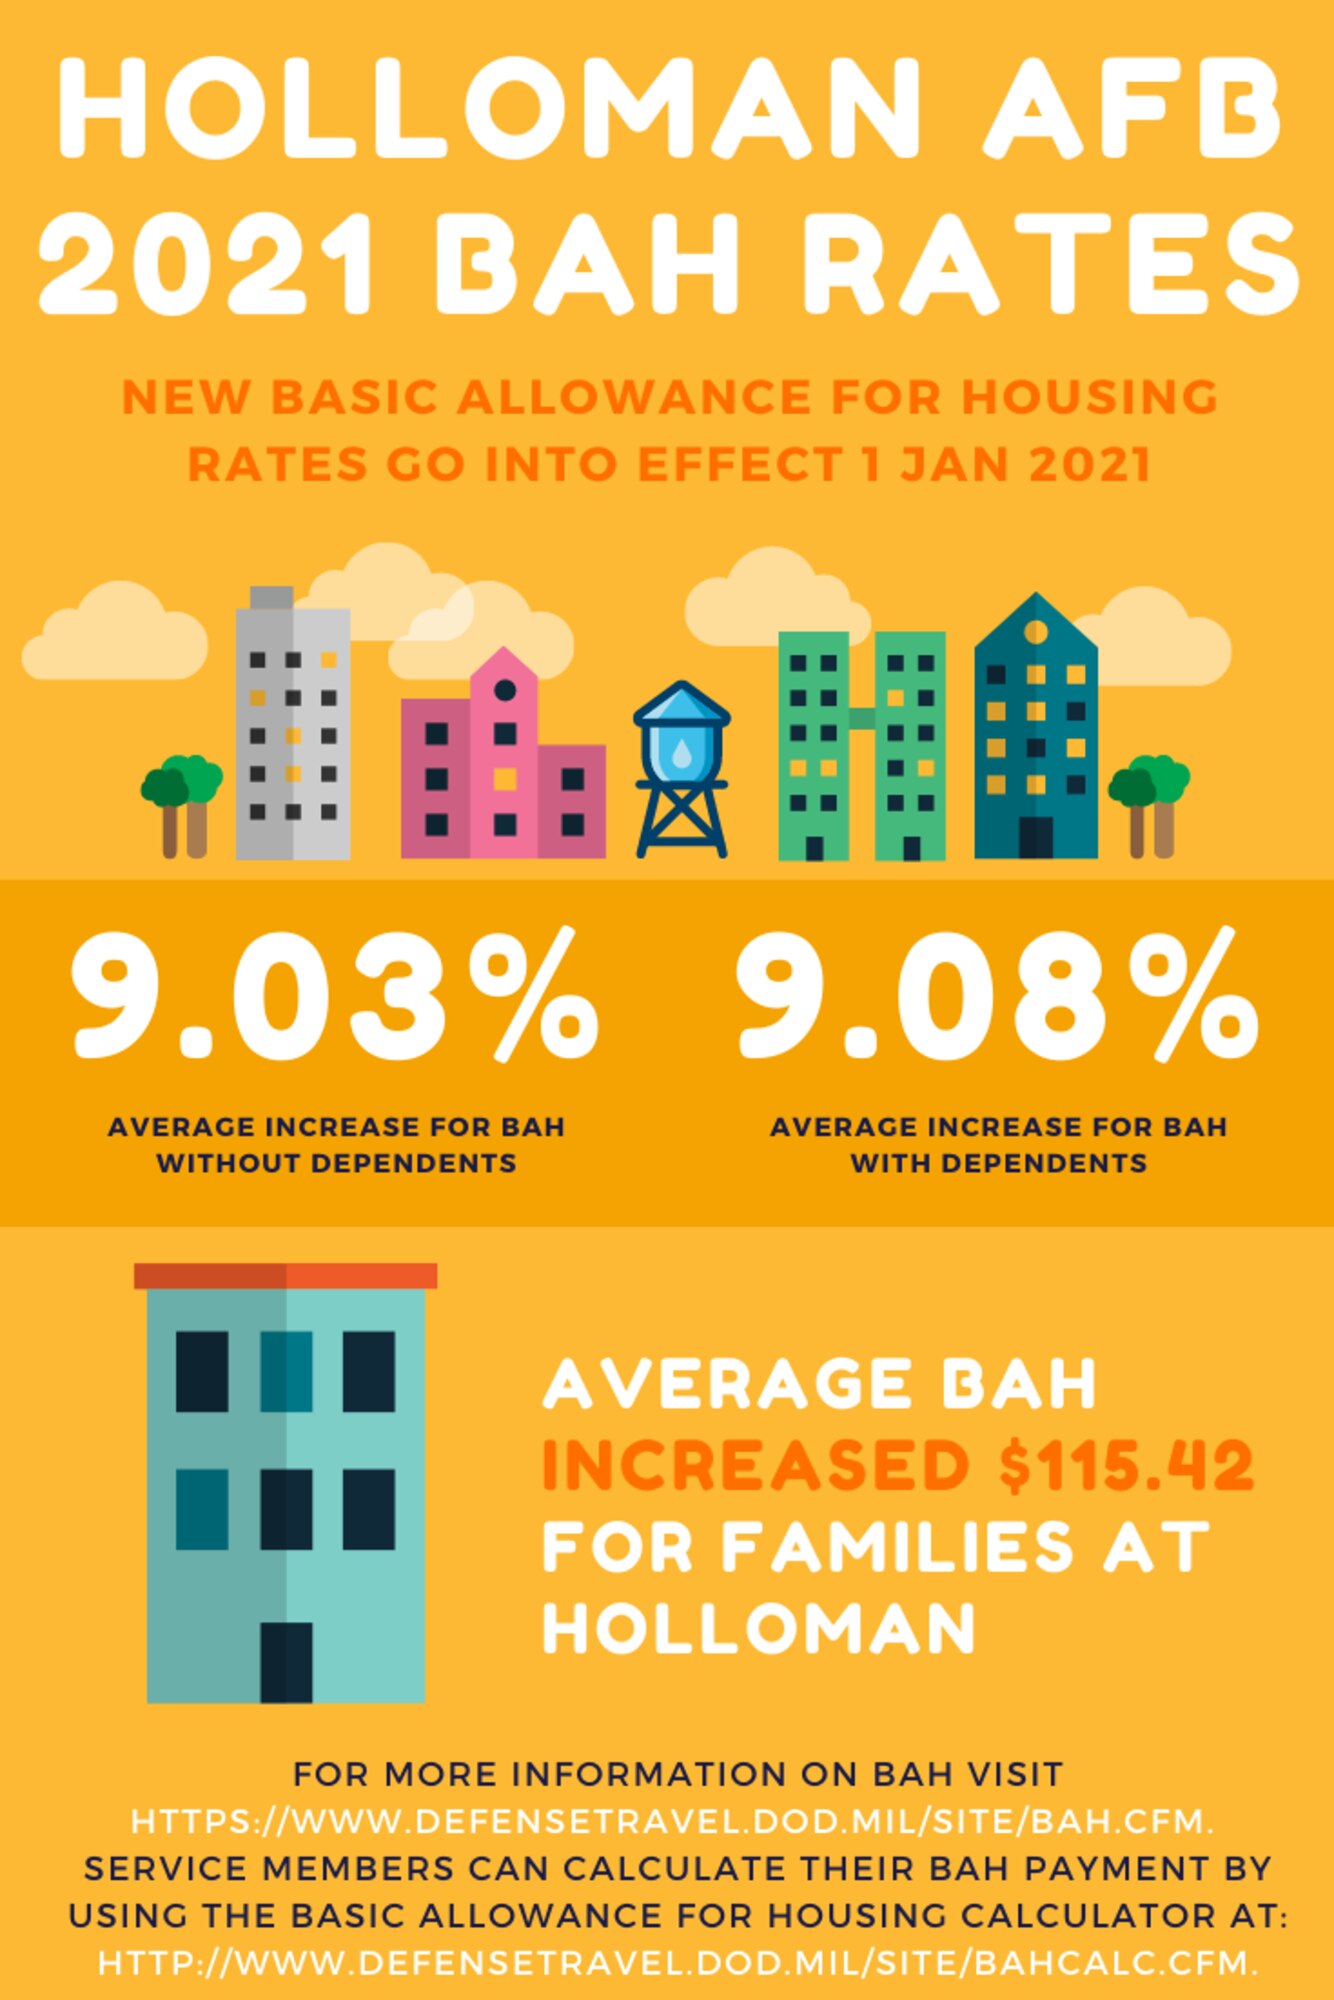 dod-releases-2021-basic-allowance-for-housing-rates-nellis-air-force